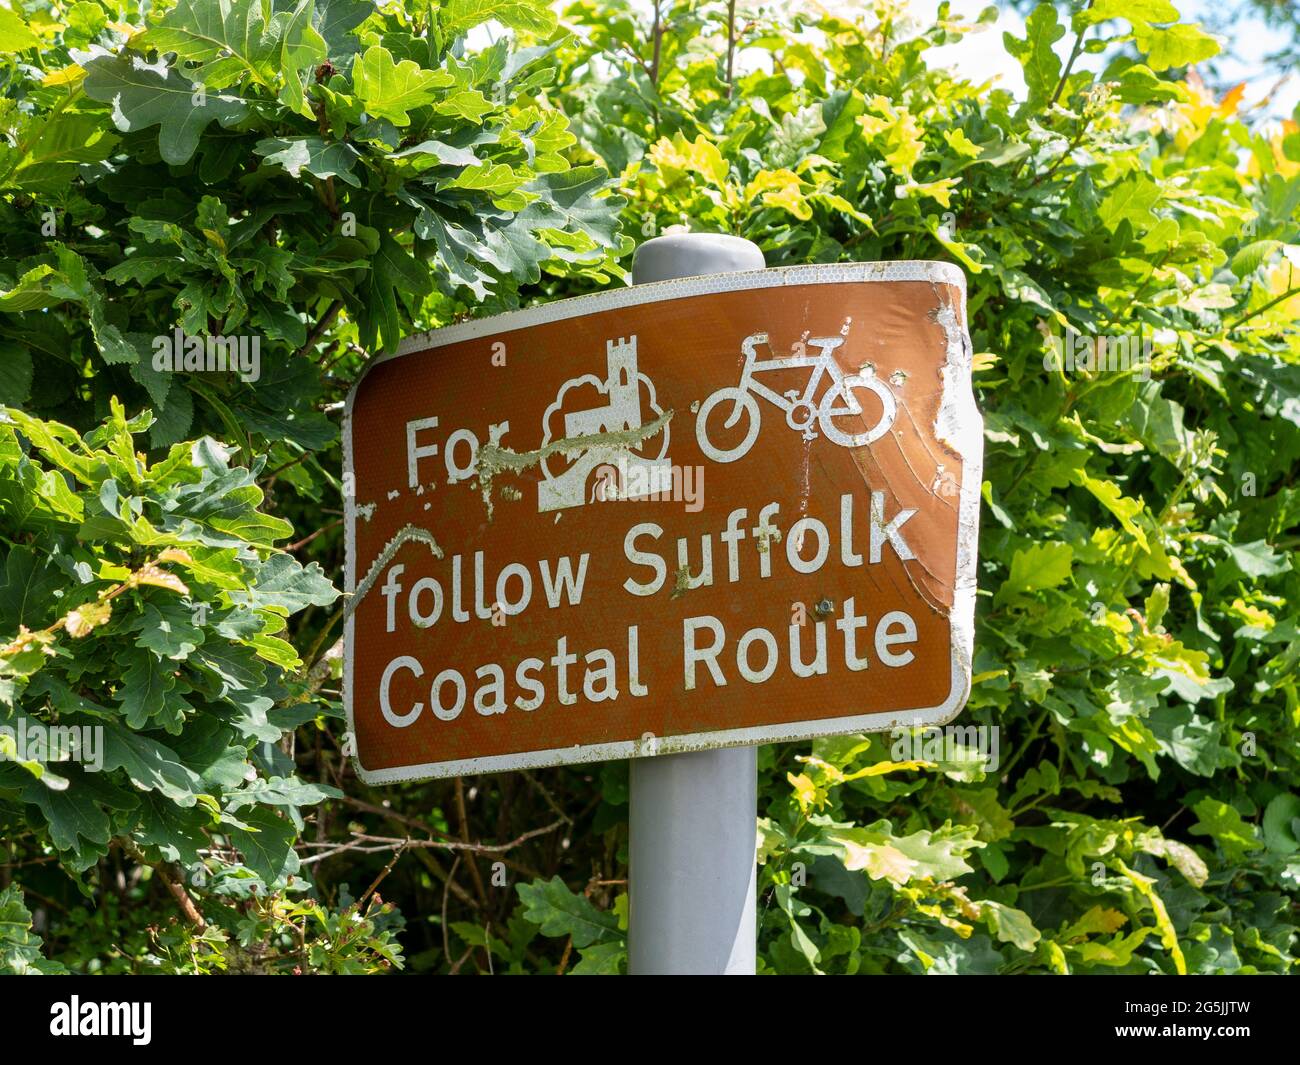 A coastal cycle route rectangular road sign in a hedge showing a dented and damaged corner Stock Photo